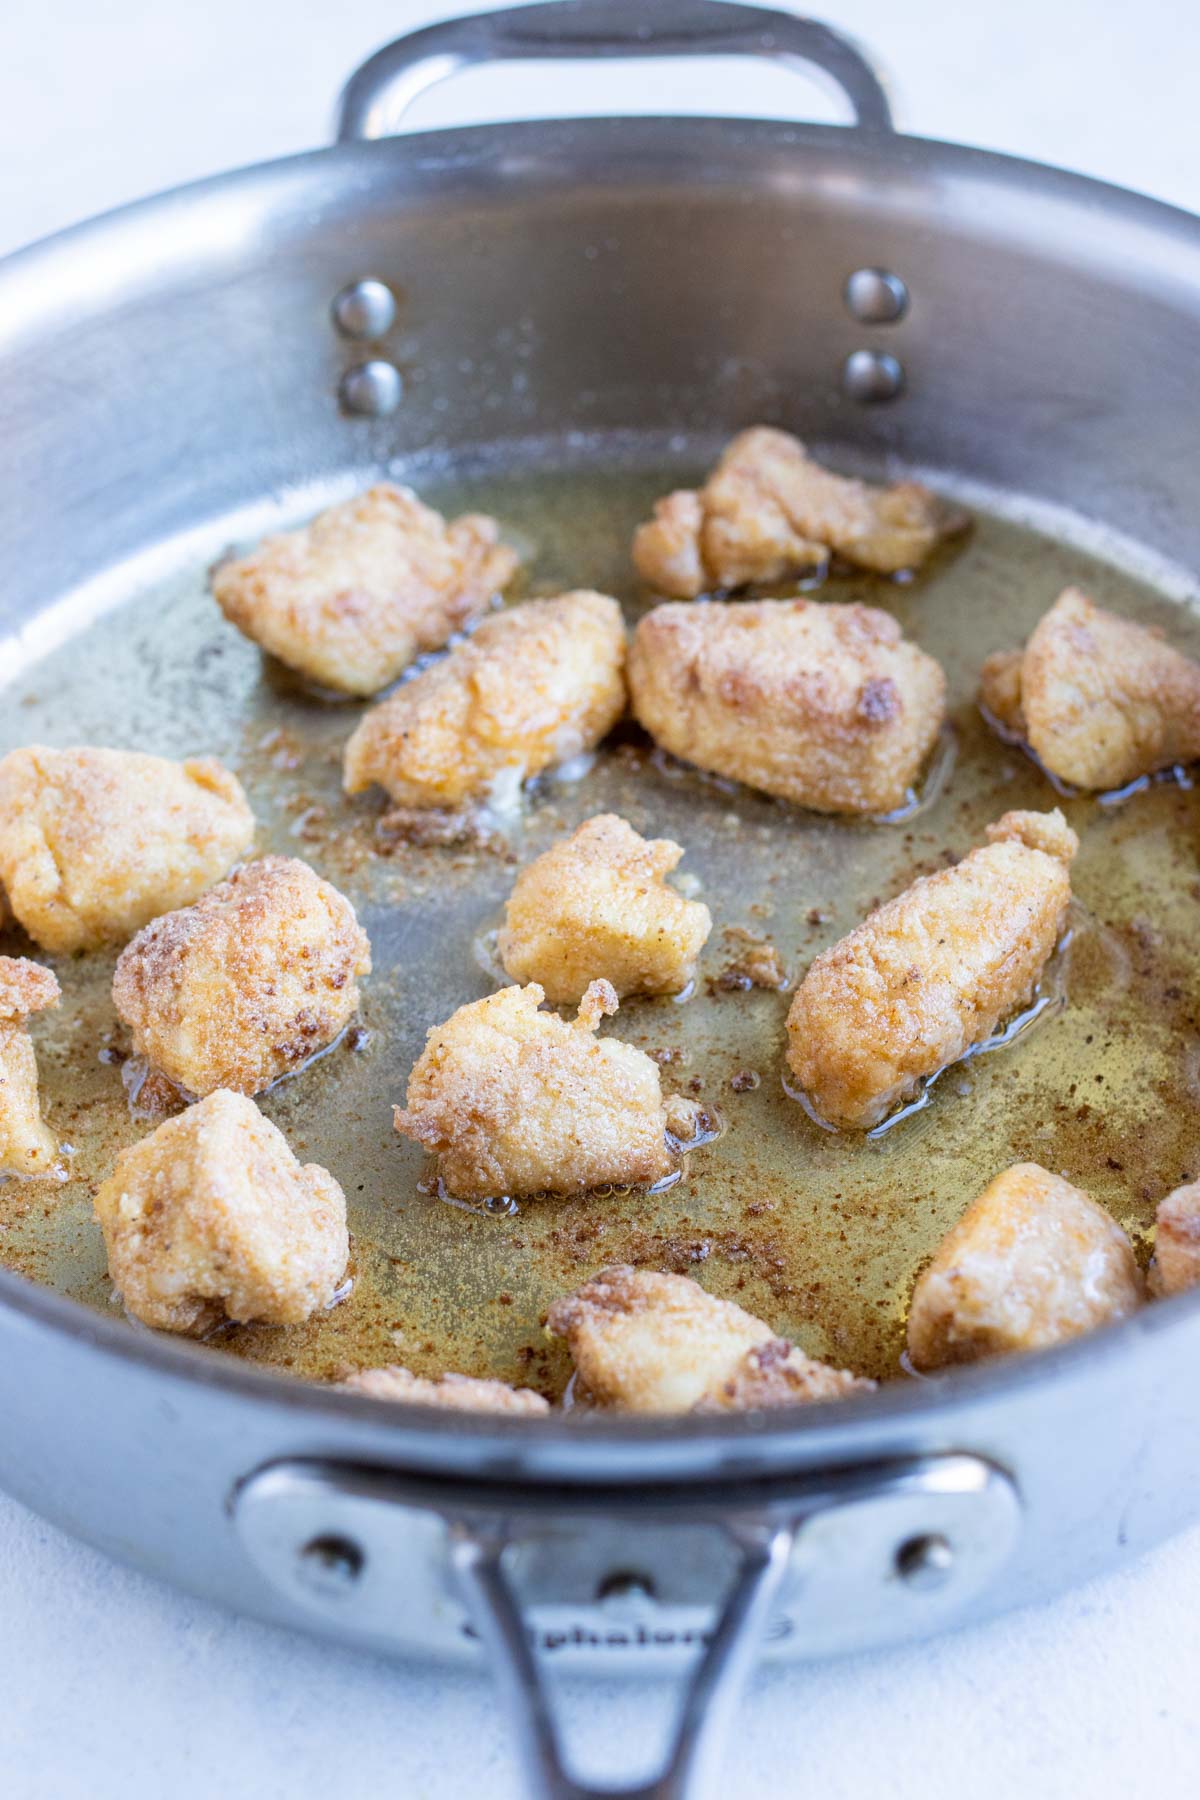 Bread nuggets are cooked on the stove in a pan.